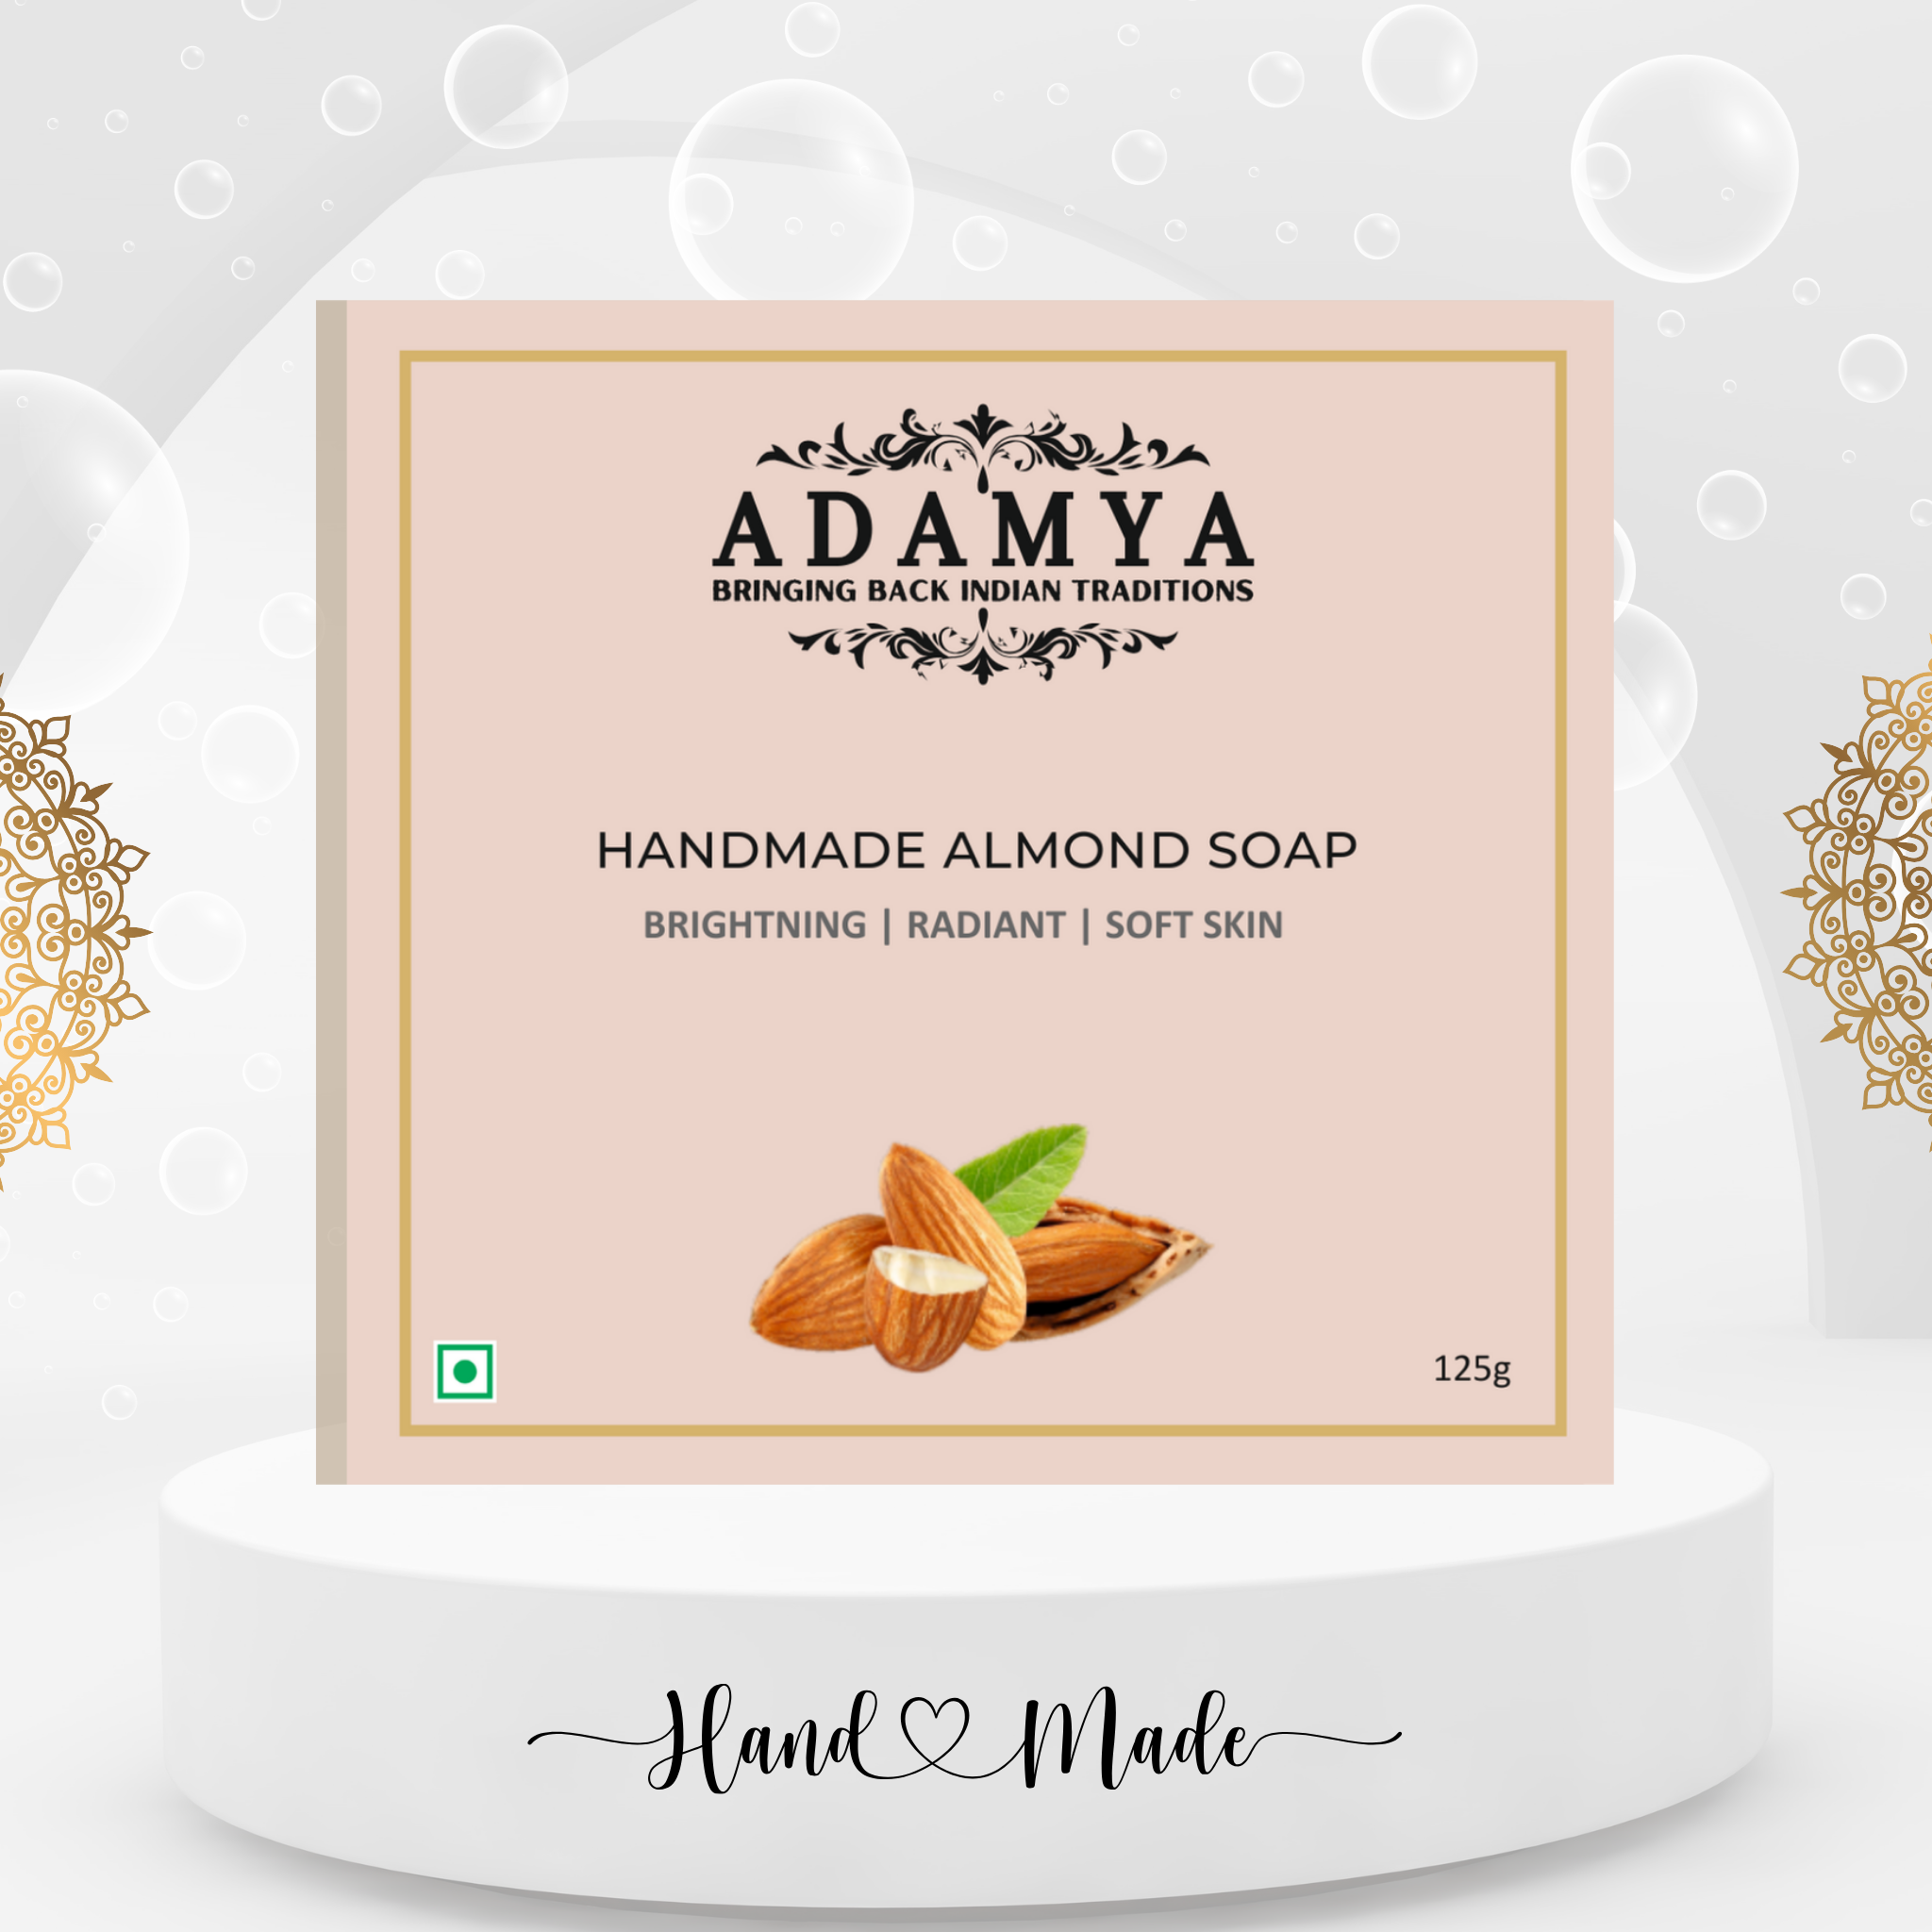 HANDMADE COLD PROCESSED ALMOND SOAP FOR BRIGHTENING, SOFT AND RADIANT SKIN